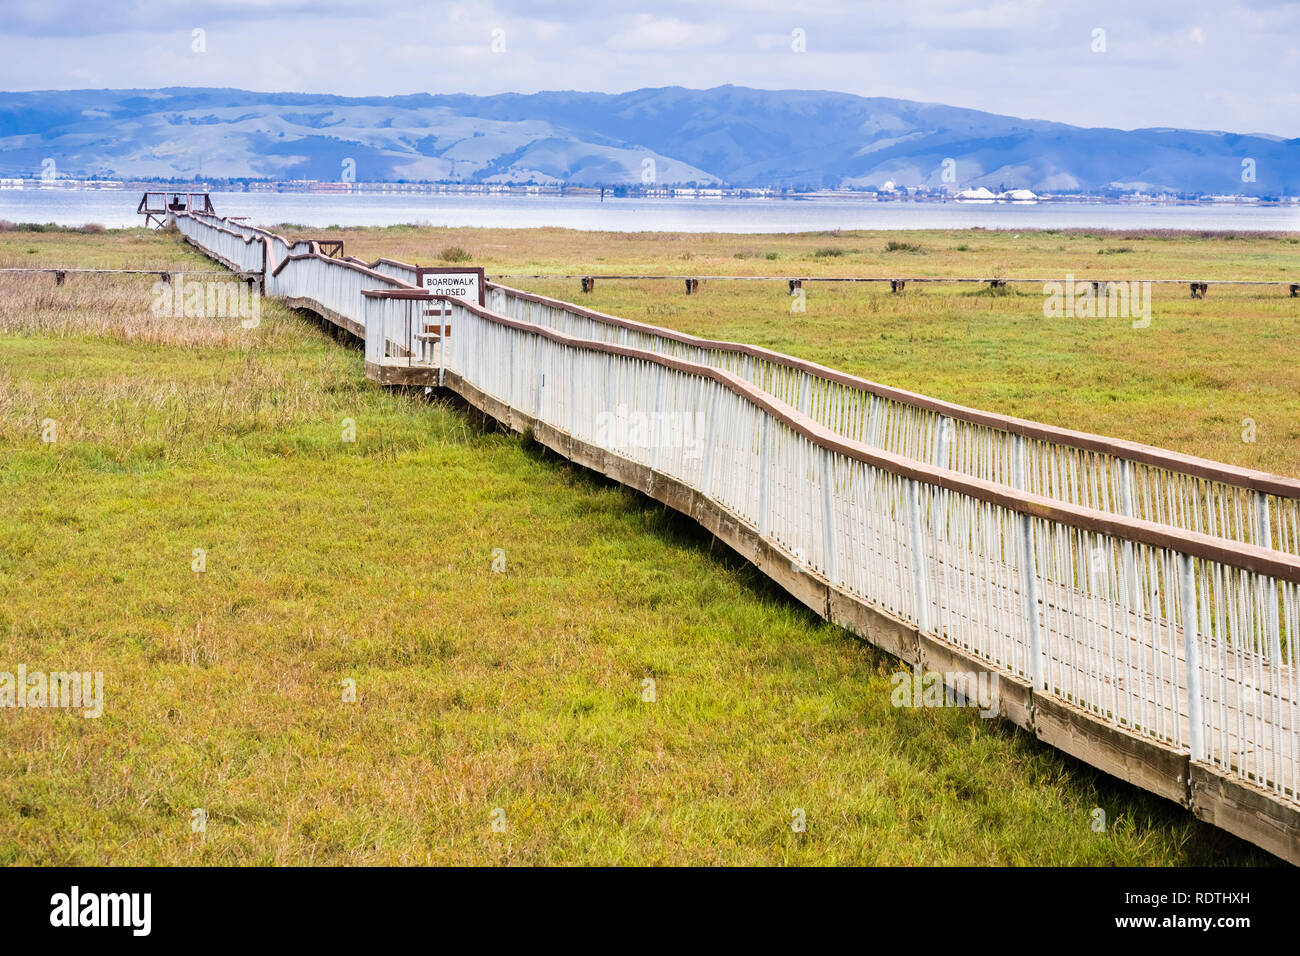 Damaged wooden boardwalk going over the marshes of south San Francisco bay area, Palo Alto Baylands Park, California Stock Photo